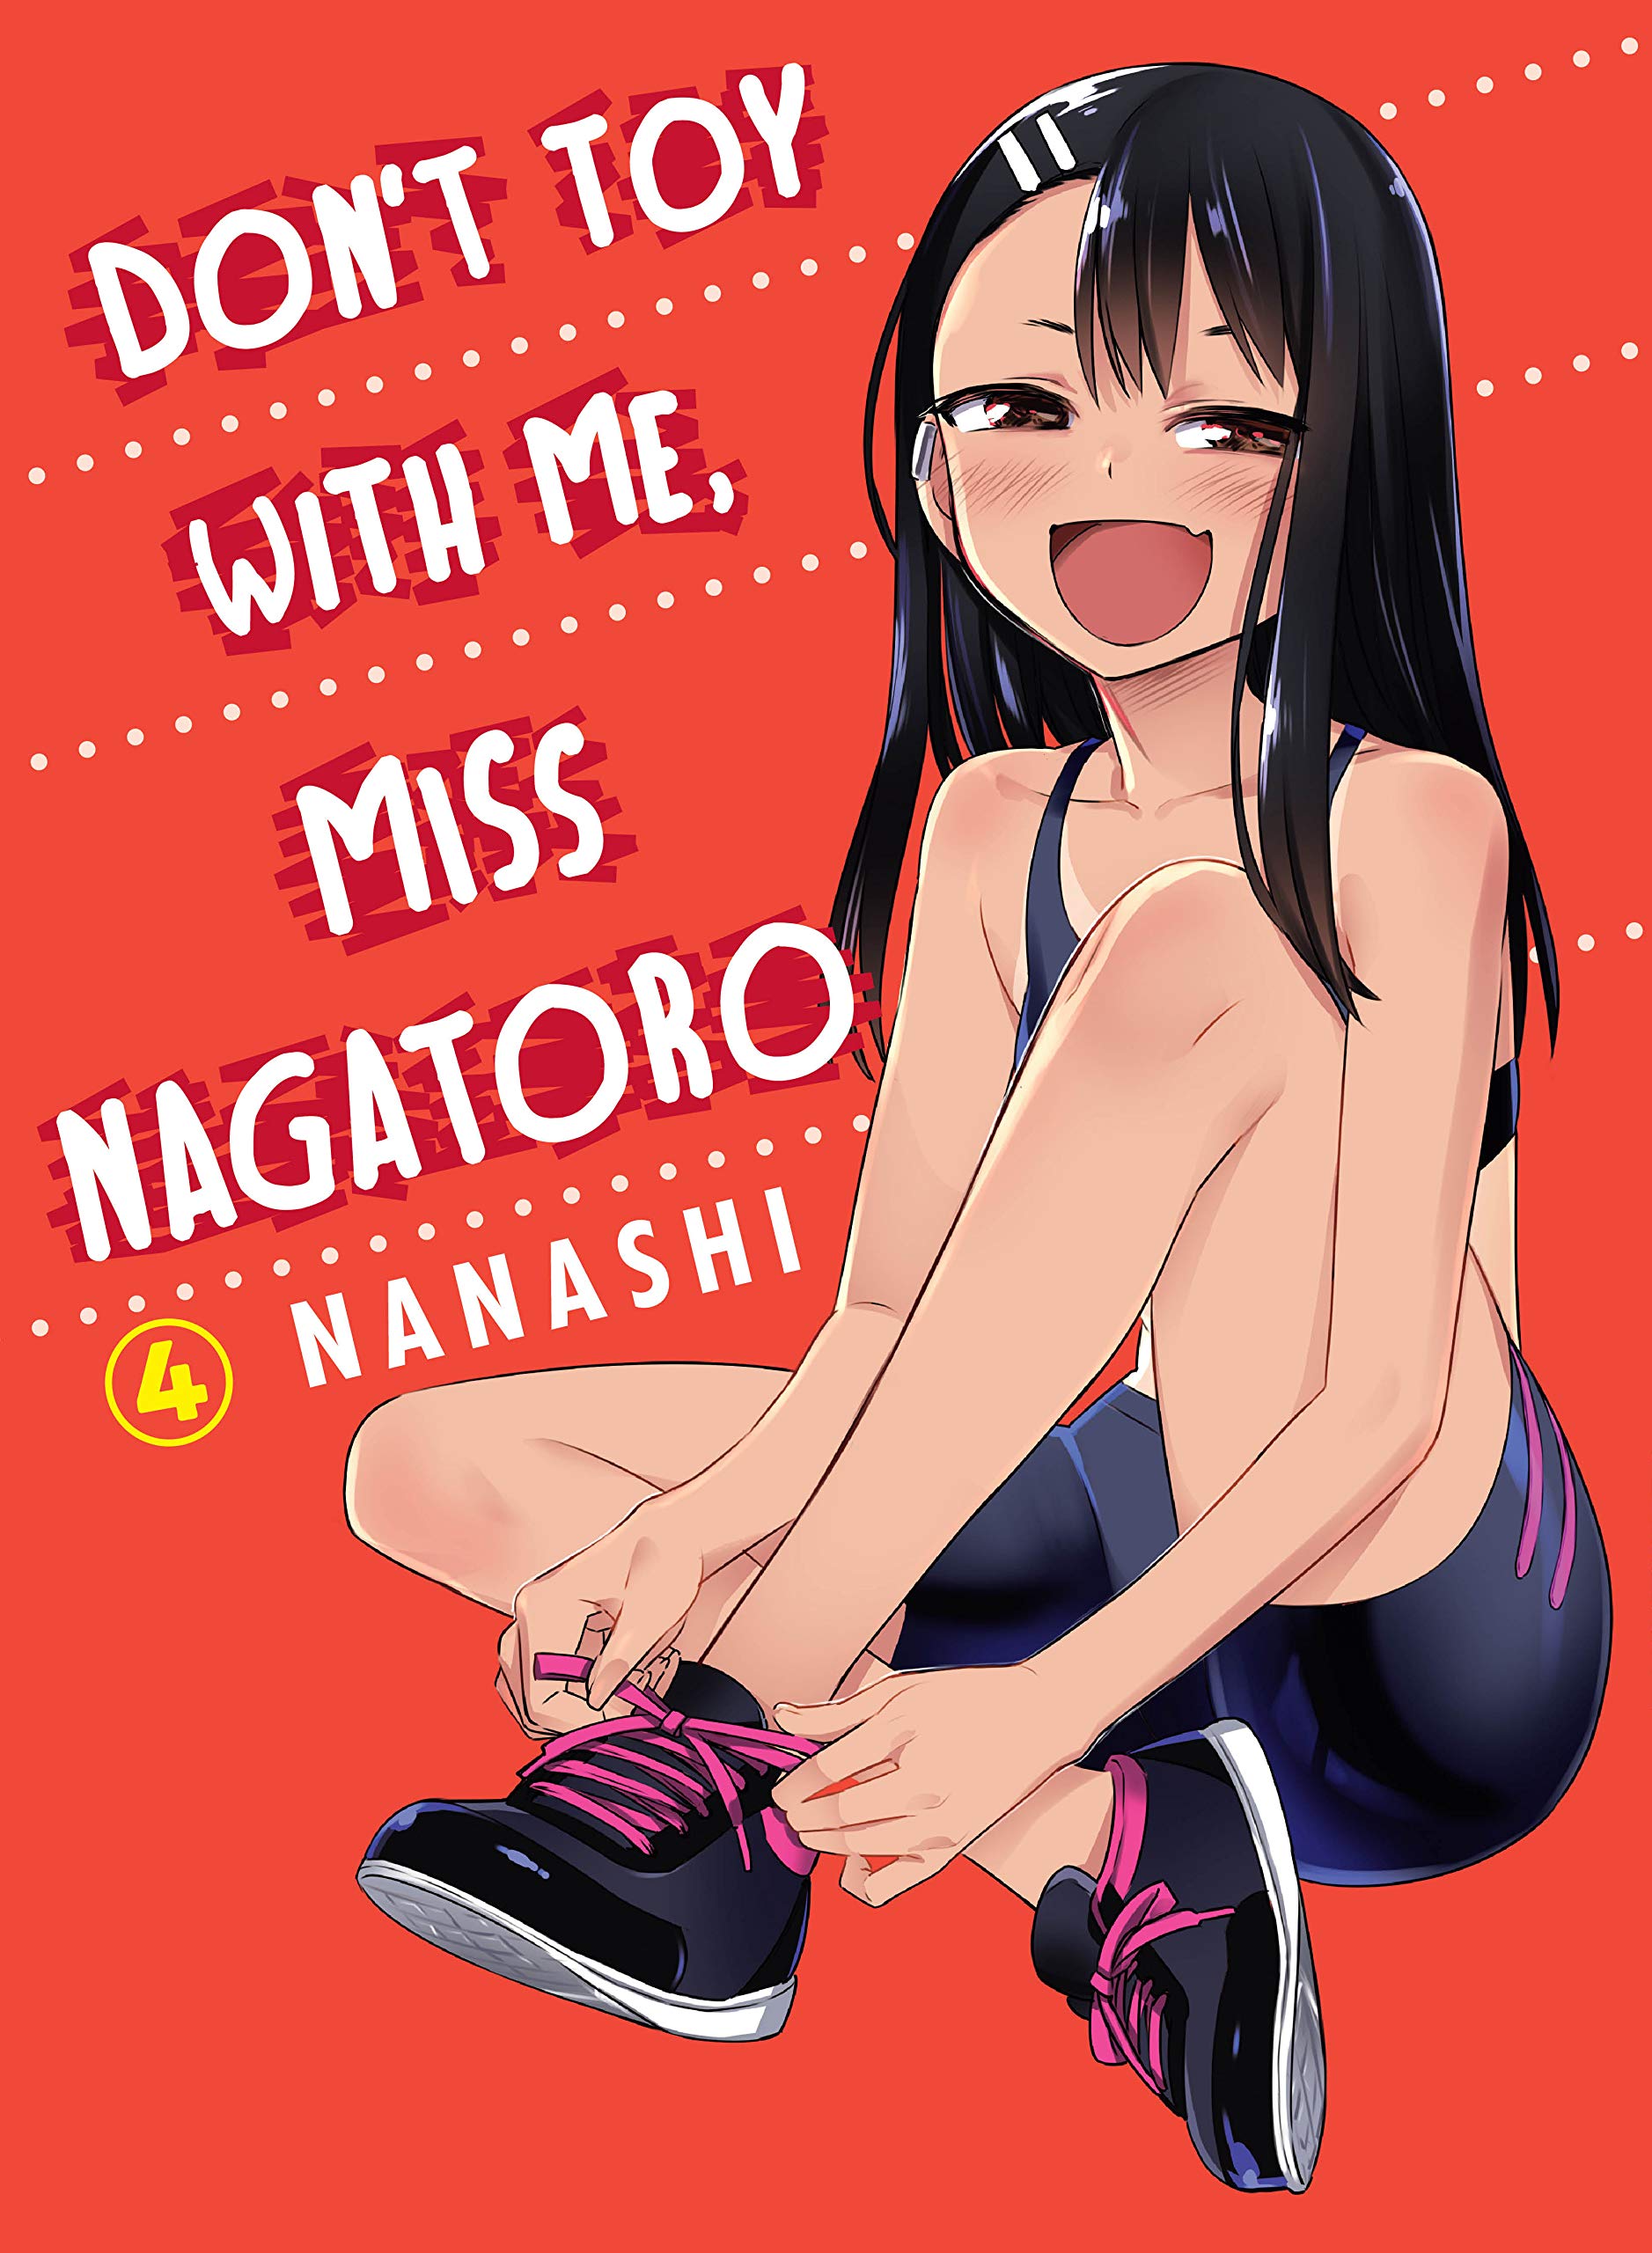 Don't Toy With Me, Miss Nagatoro, volume 4 (Don't Mess With Me Miss Nagatoro)